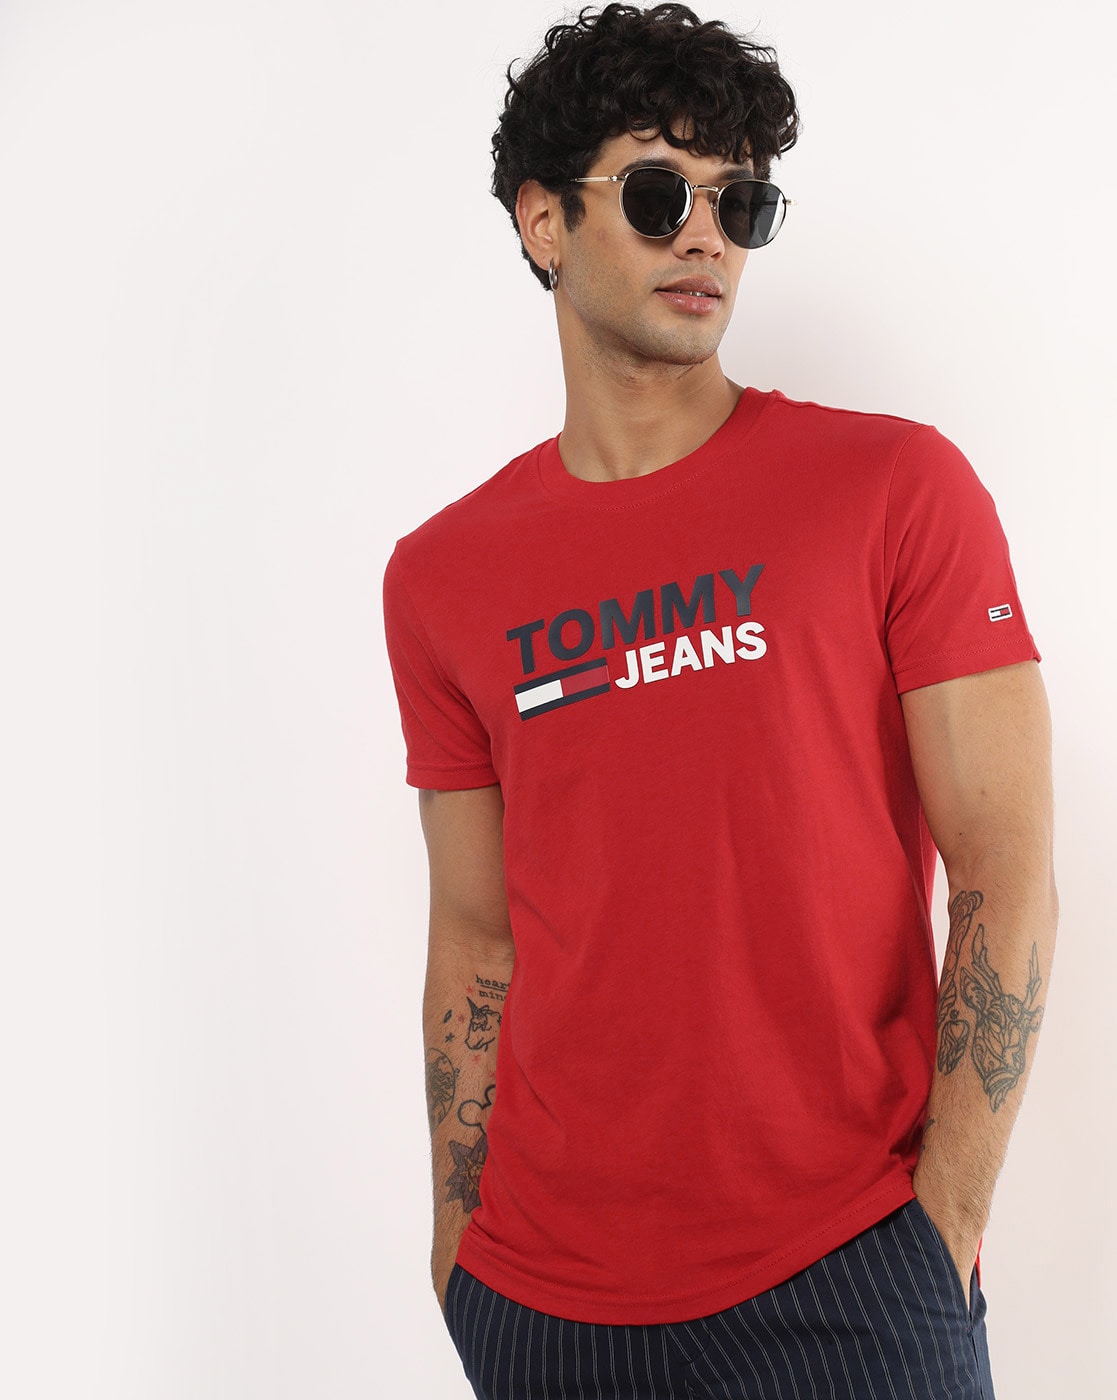 Buy > tommy hilfiger round neck t shirts > in stock